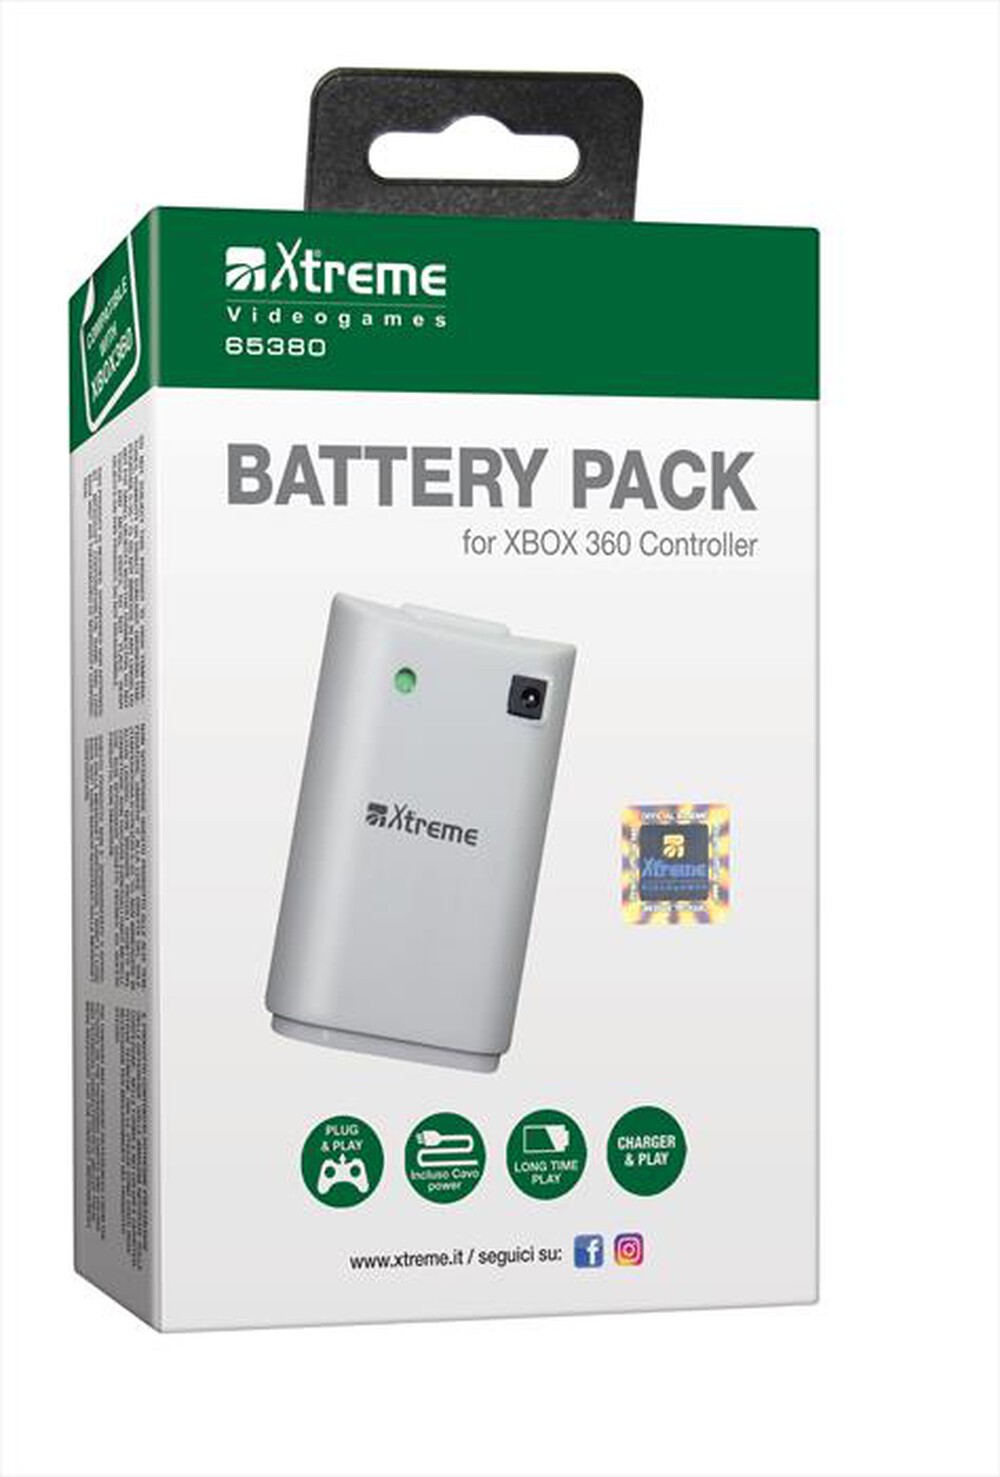 "XTREME - 65380 - Xbox 360 Battery Pack + Power Cable"